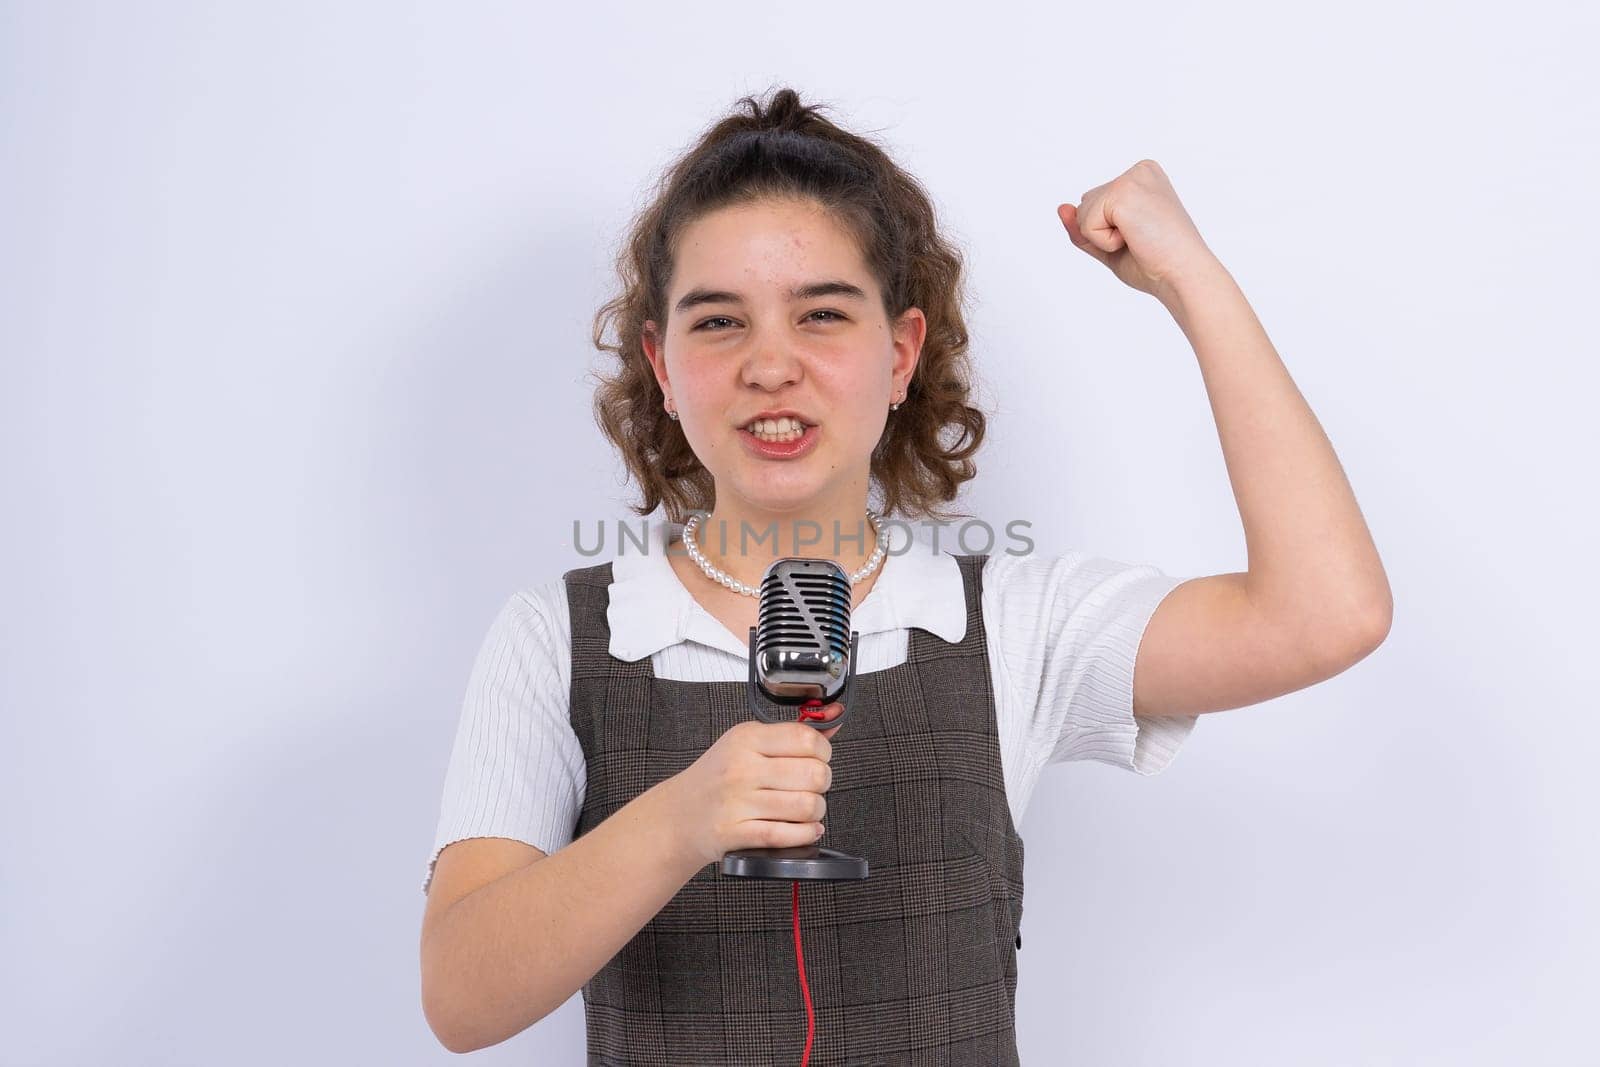 With microphone in hand positive teenage girl singer, young karaoke singer hold microphone. by Zelenin